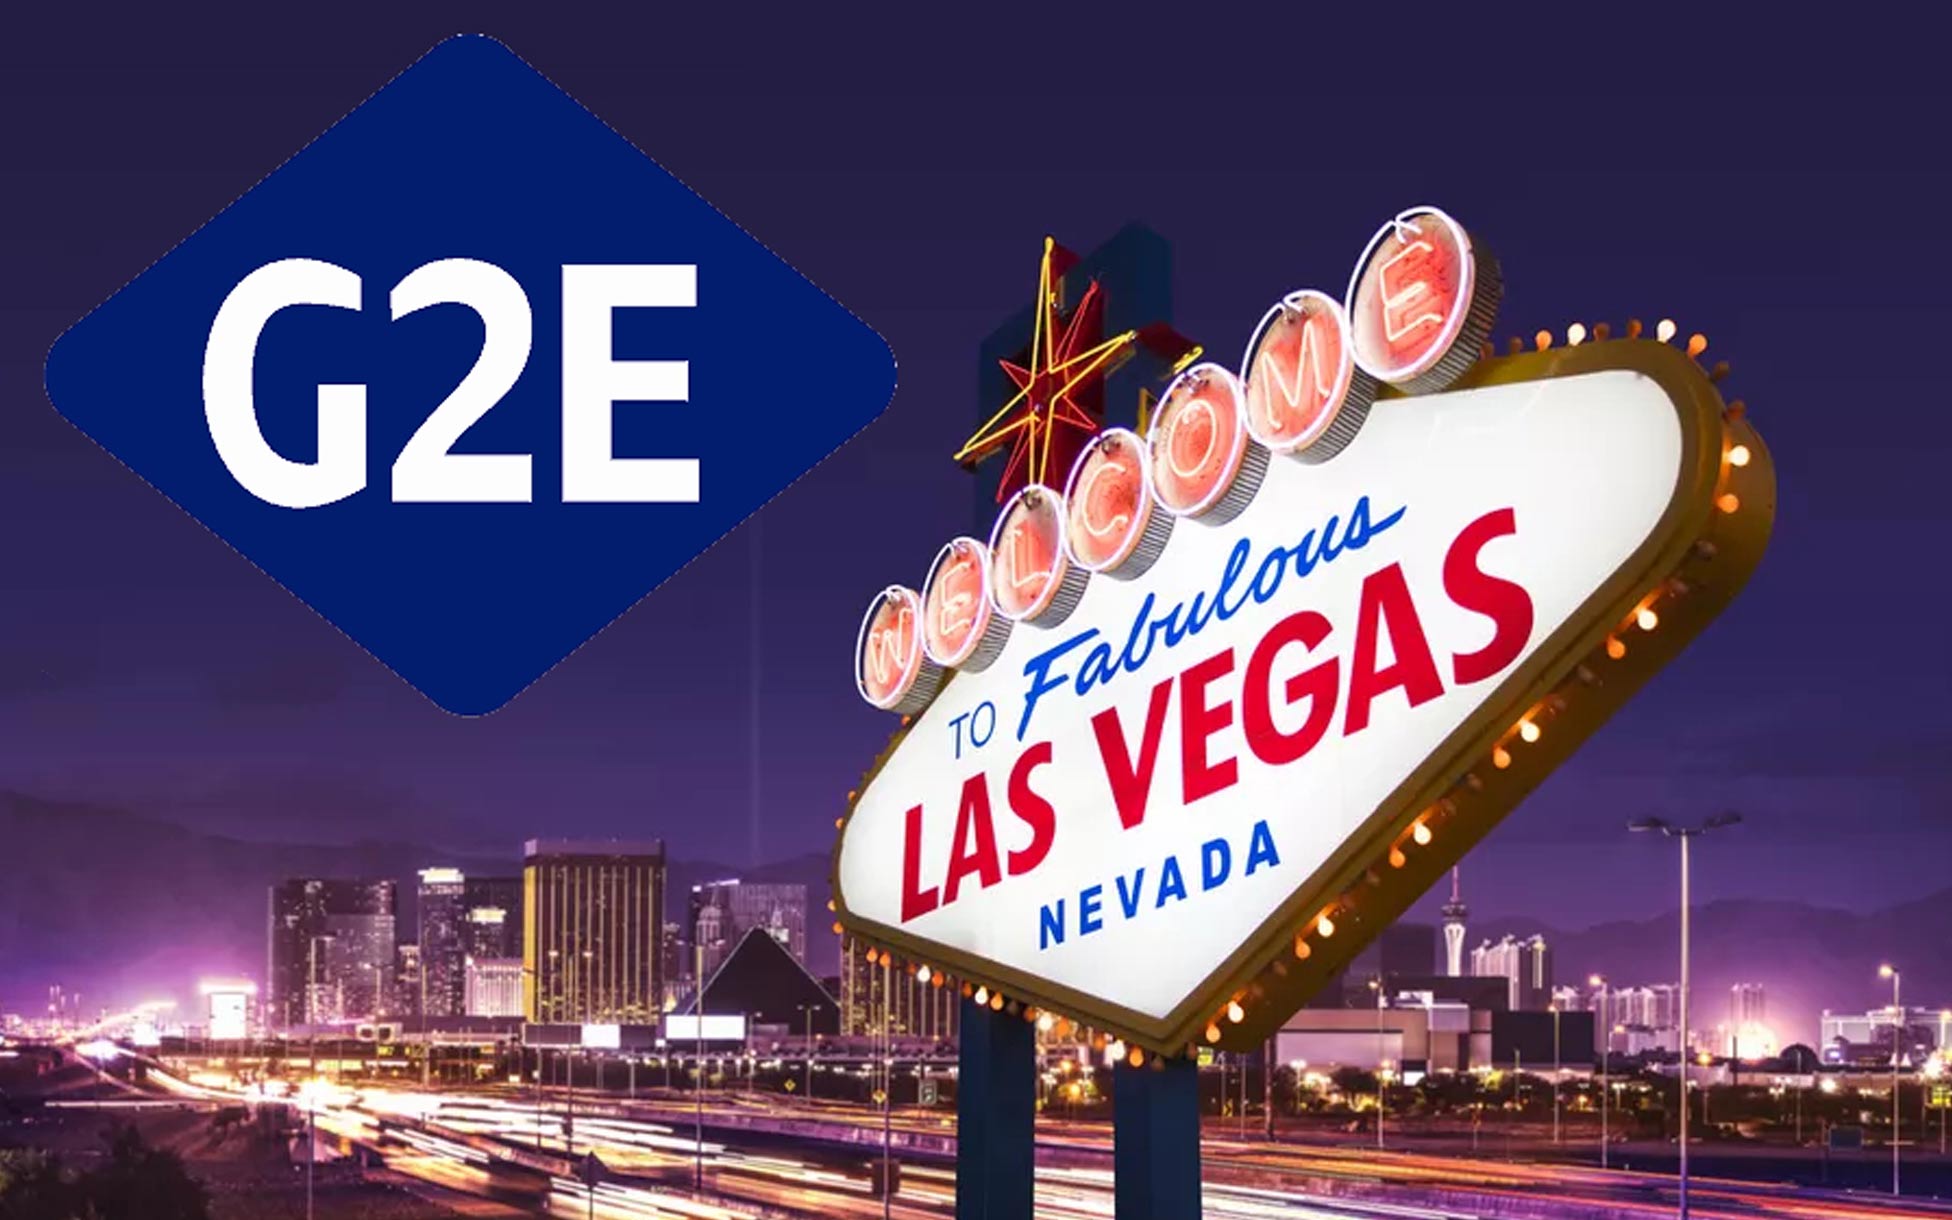 See you at G2E in Las Vegas - King Roulettes